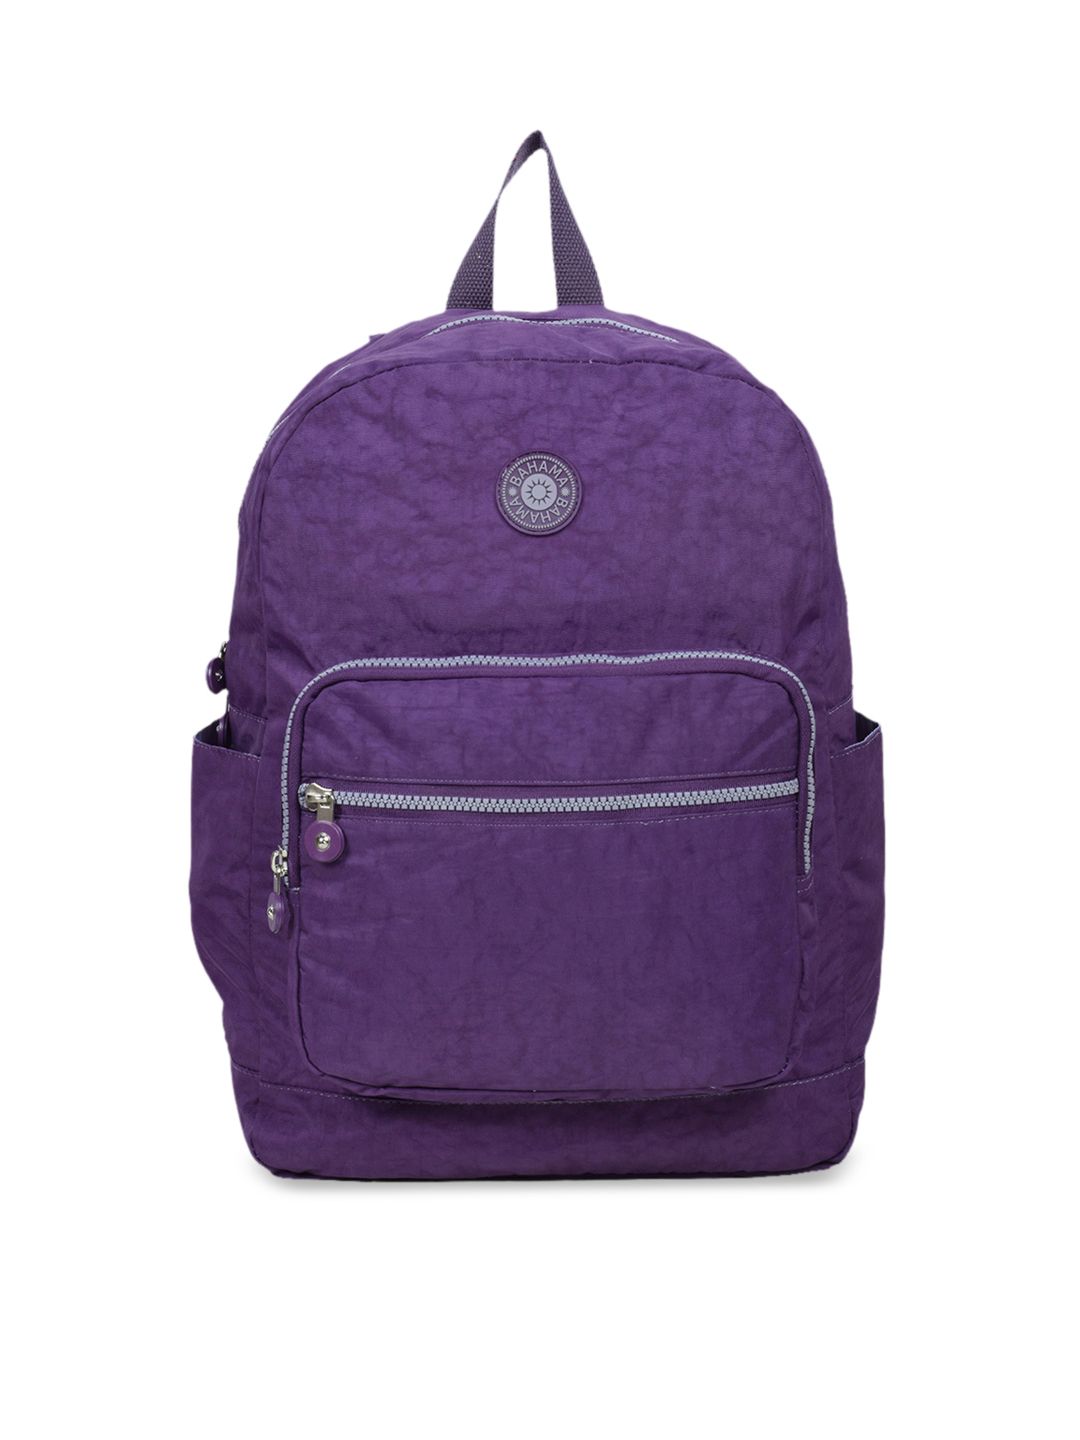 BAHAMA Unisex Purple Solid Backpack Price in India